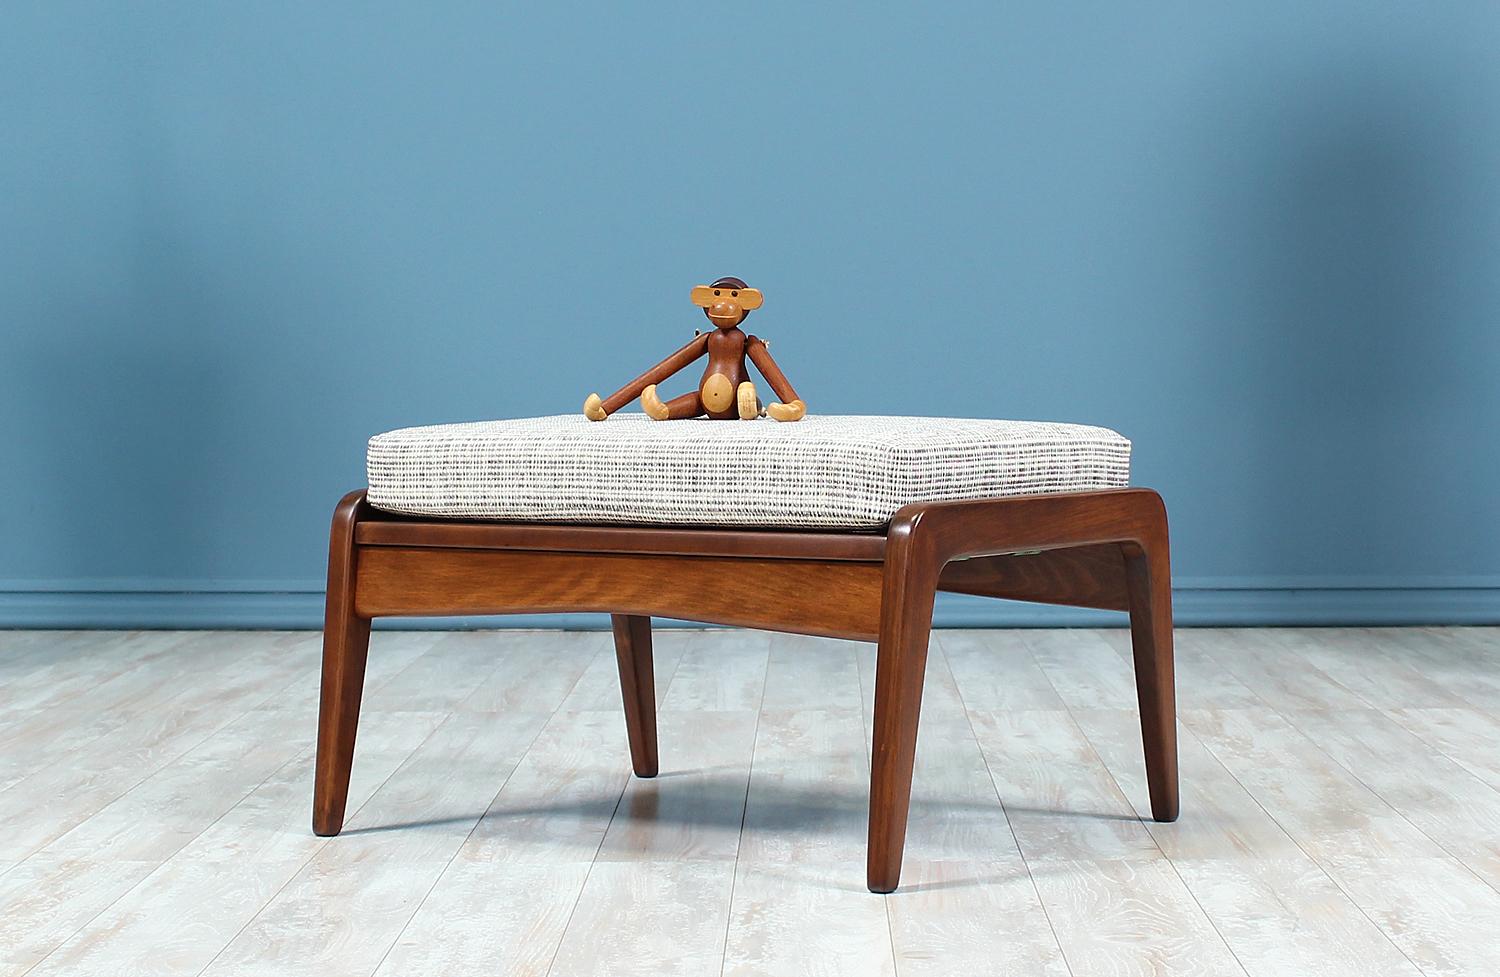 A beautiful stool or ottoman designed by Ib Kofod-Larsen for Selig in Denmark circa 1960’s. This compact and versatile piece features a solid walnut-stained beech wood frame and a comfortable new foam cushion upholstered with a textured grey tweed